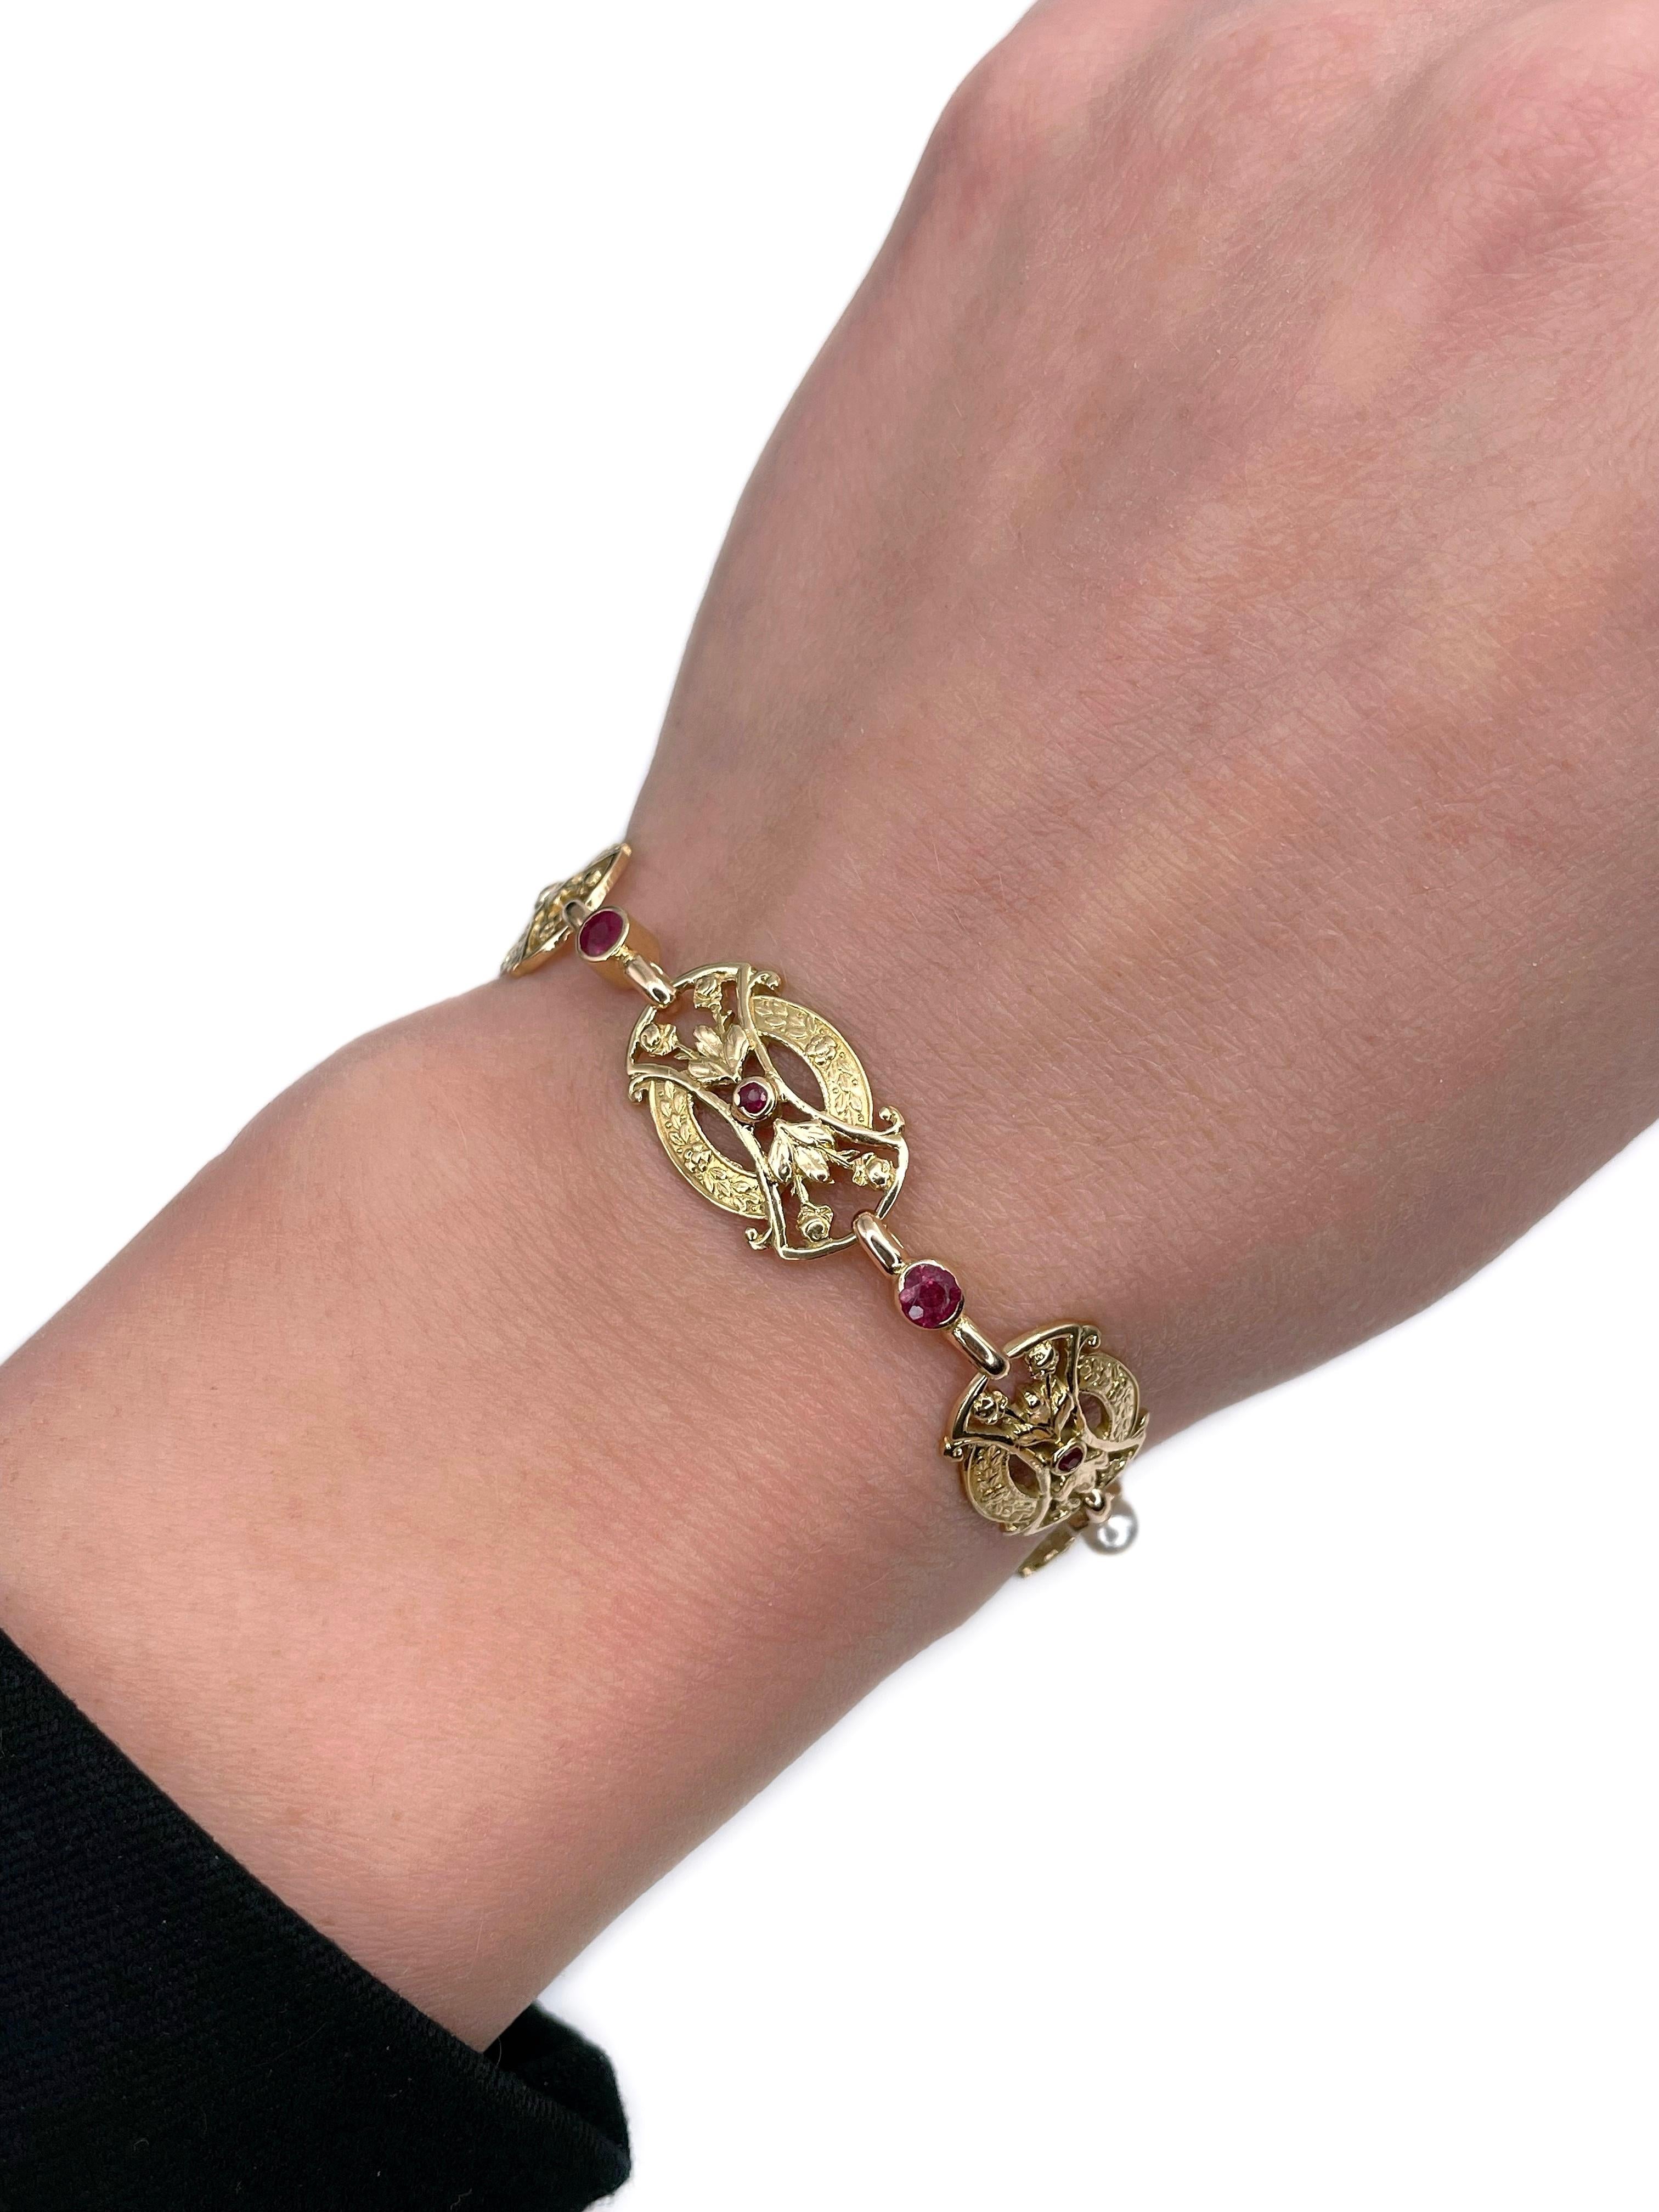 This is a Victorian floral design link bracelet crafted in 18K and 14K yellow gold. Circa 1900. 

It features:
- 7 rubies ( round cut, TW 0.38ct, slpR 5/4, SI-P1)
- 3 spinels ( round cut, TW 0.55ct, R 5/4, P2)
- 2 cultured pearls

Has a safe closure